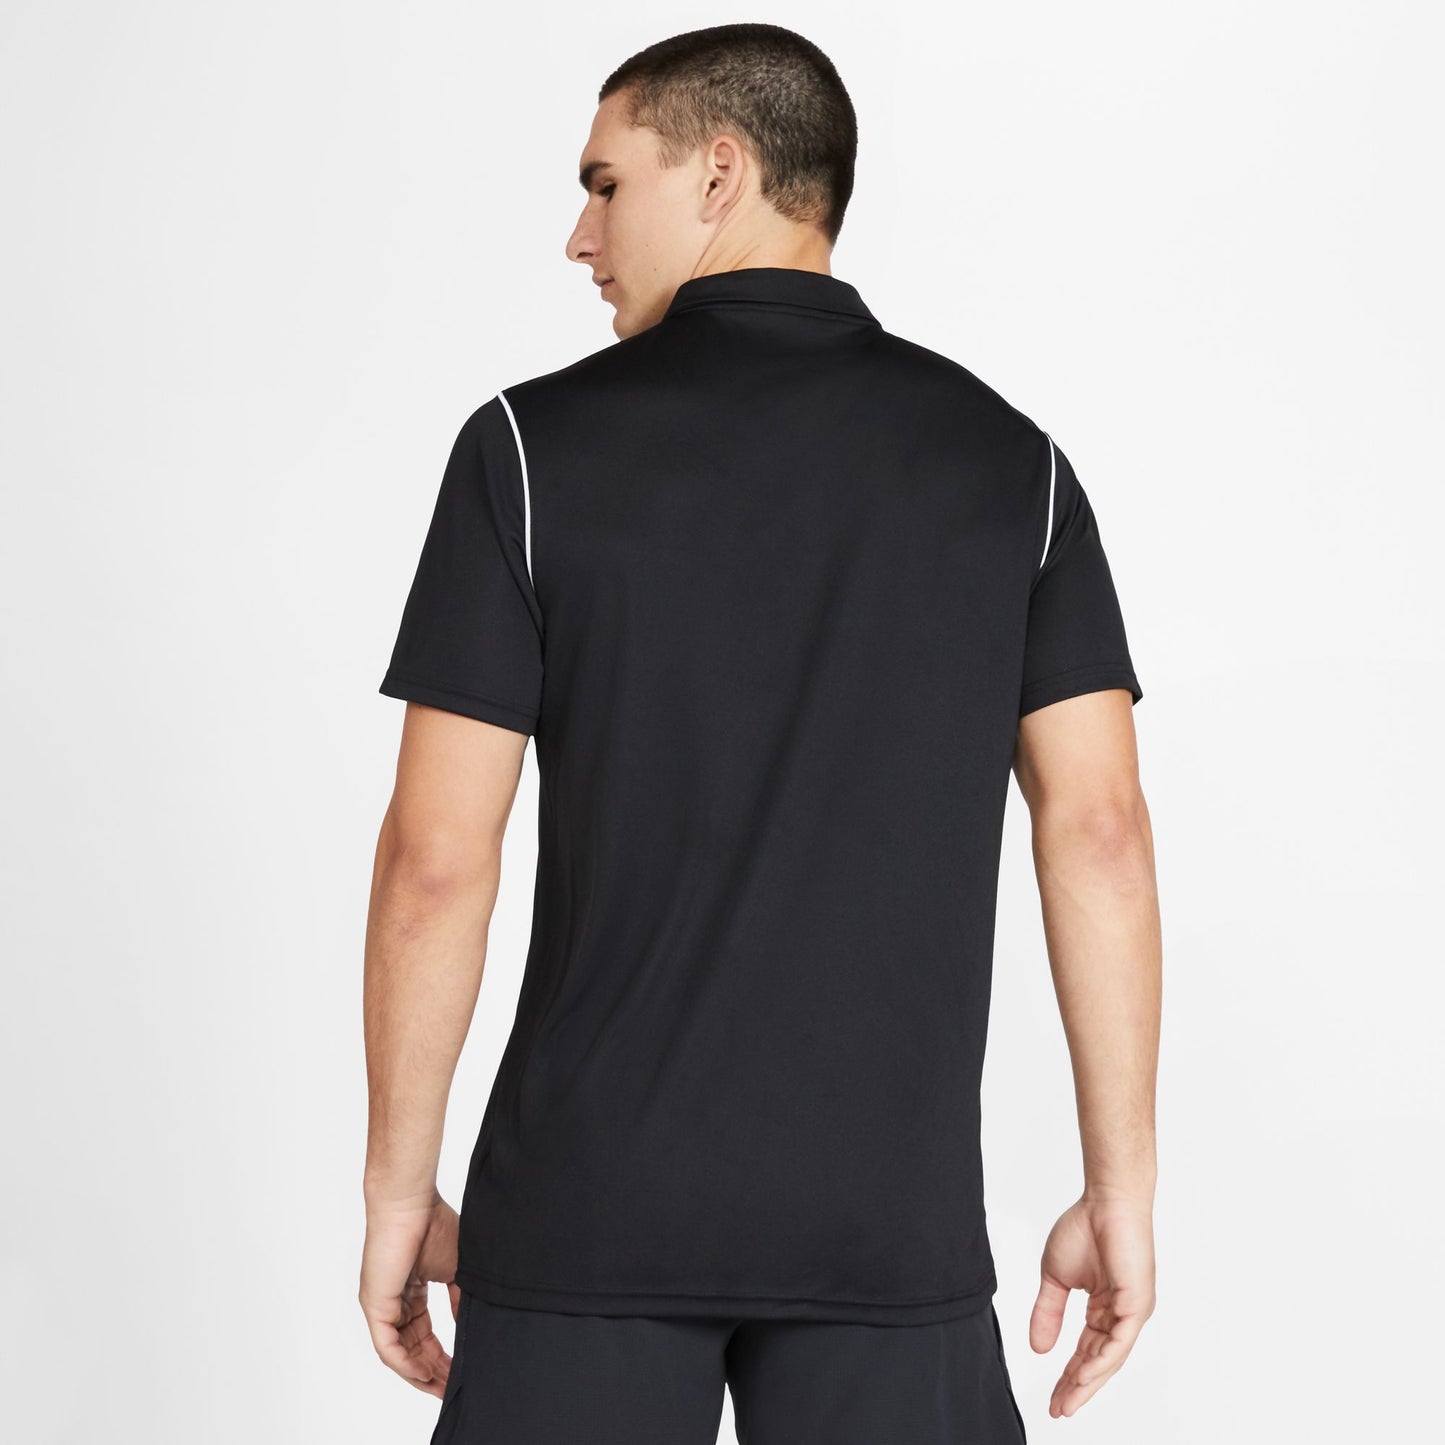 DURIE HILL FC NIKE POLO - MEN'S